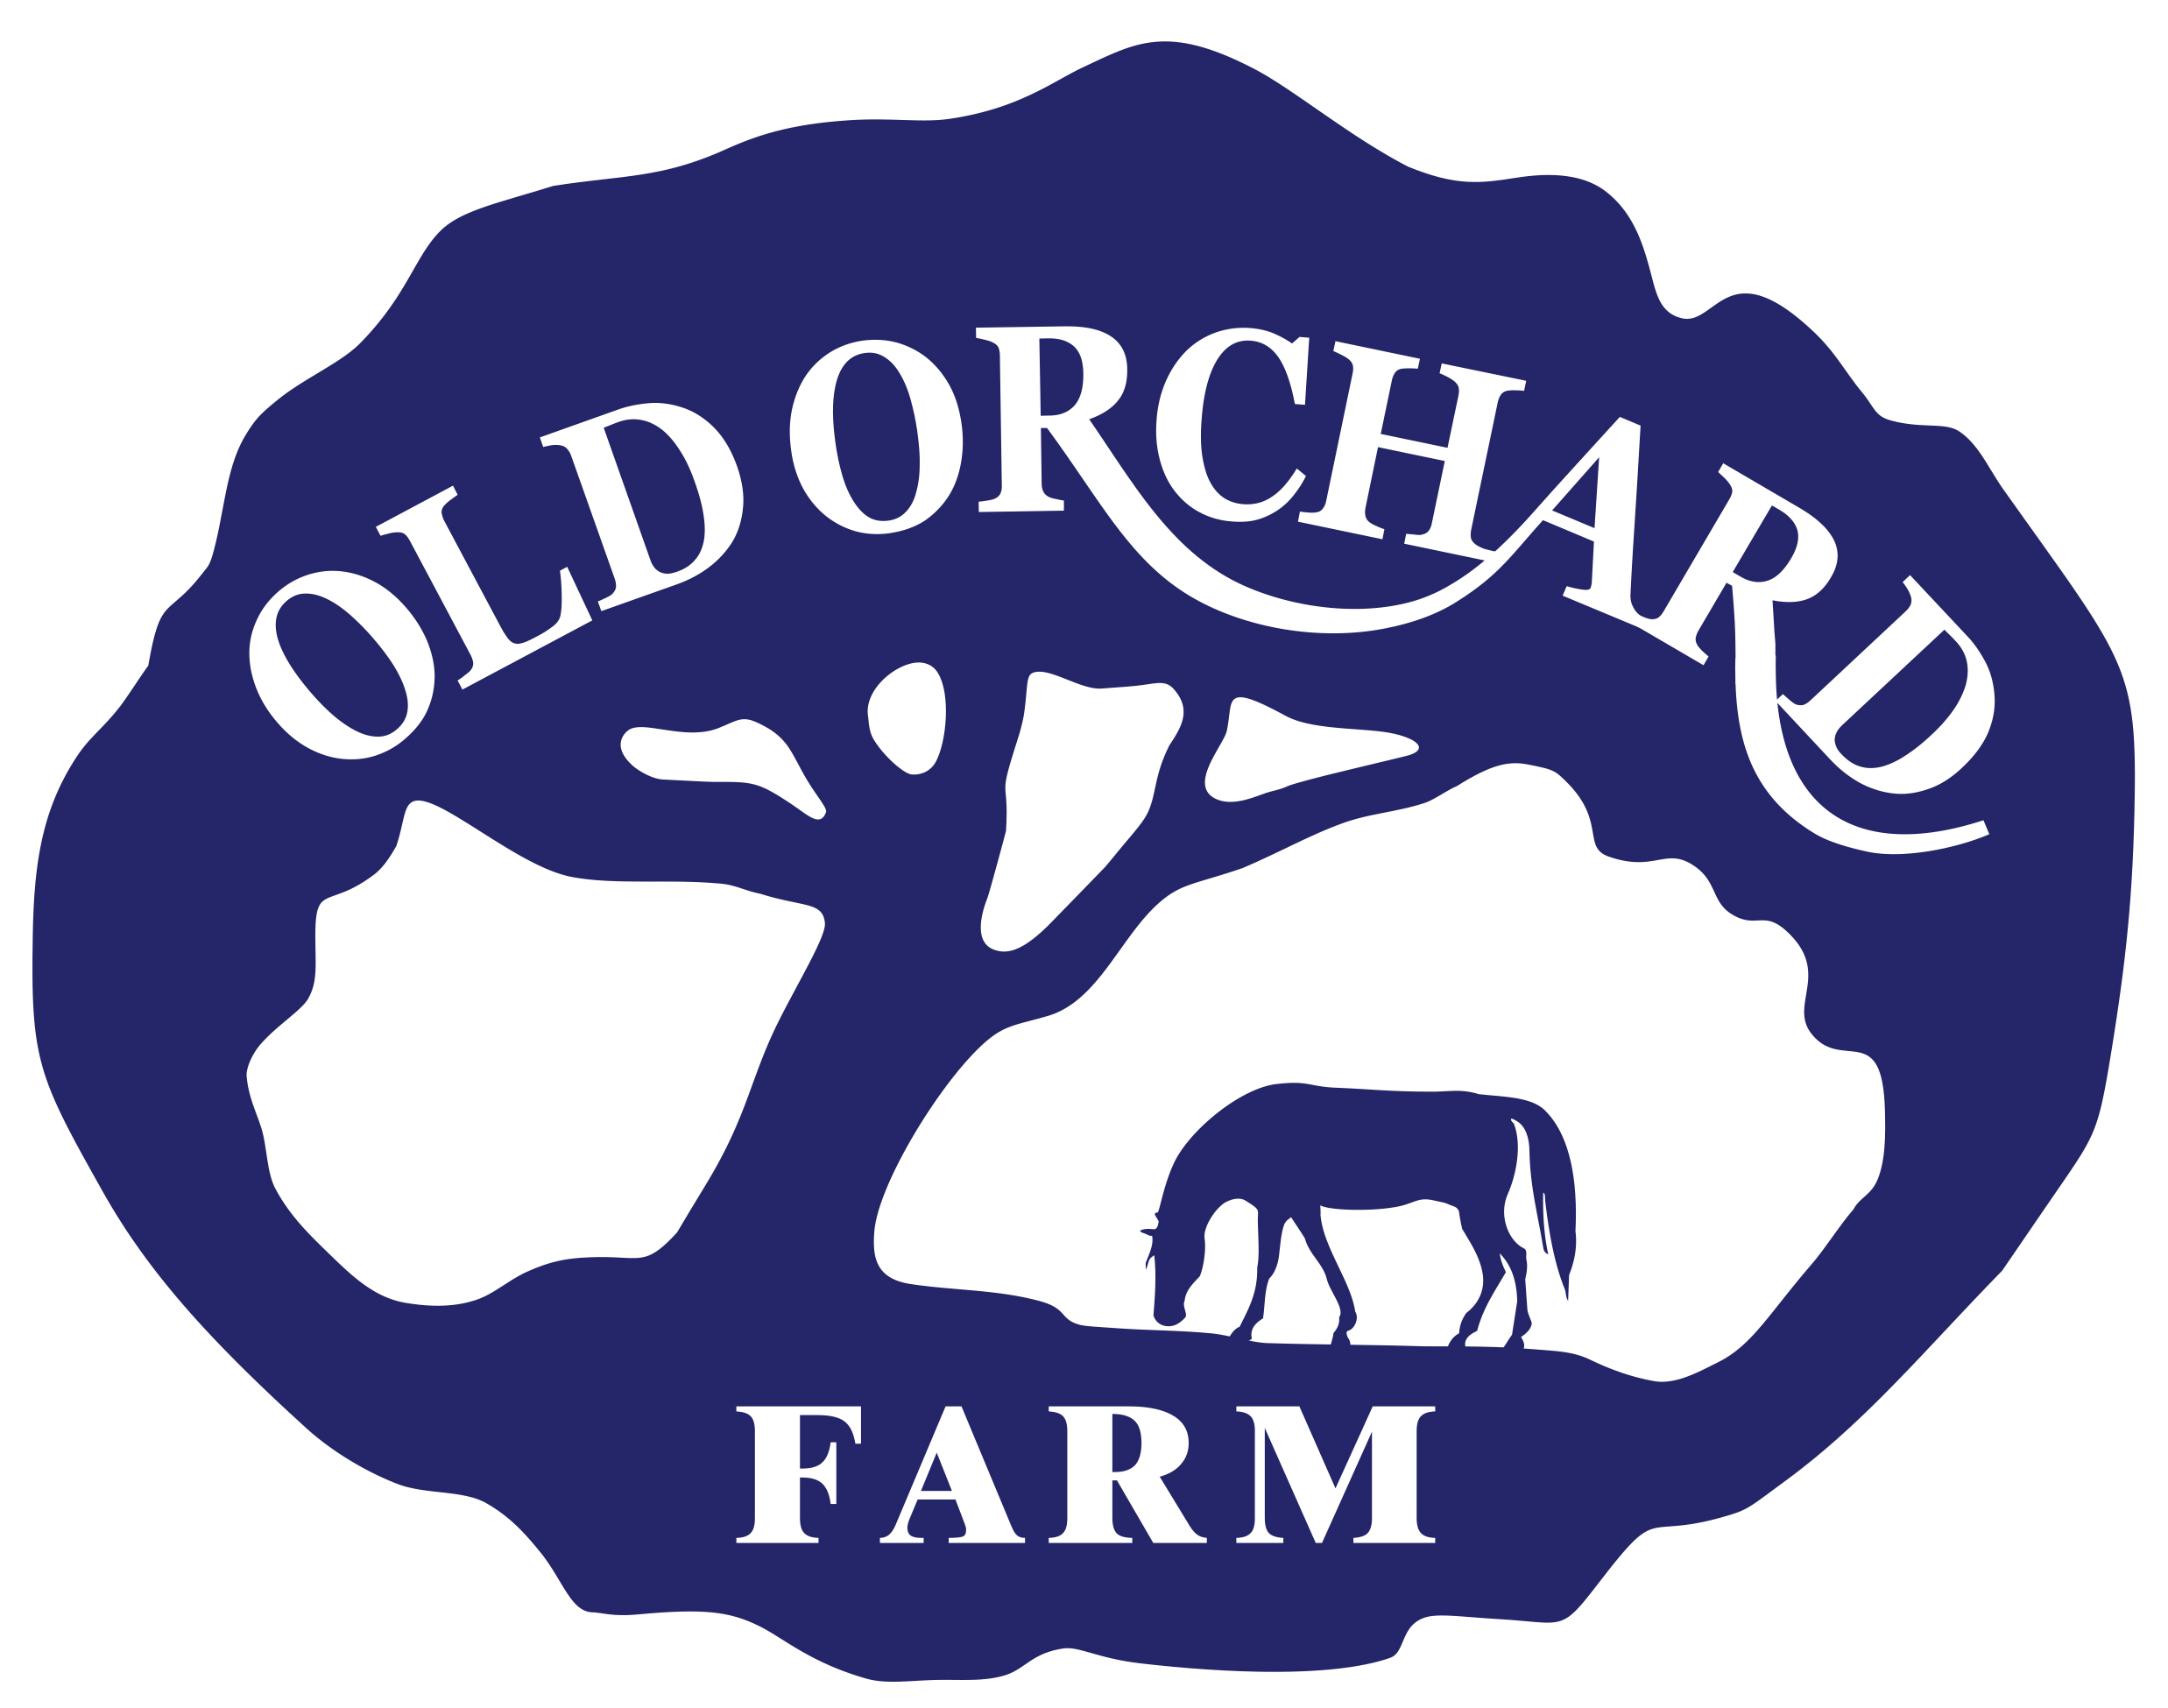 Old Orchard Farm